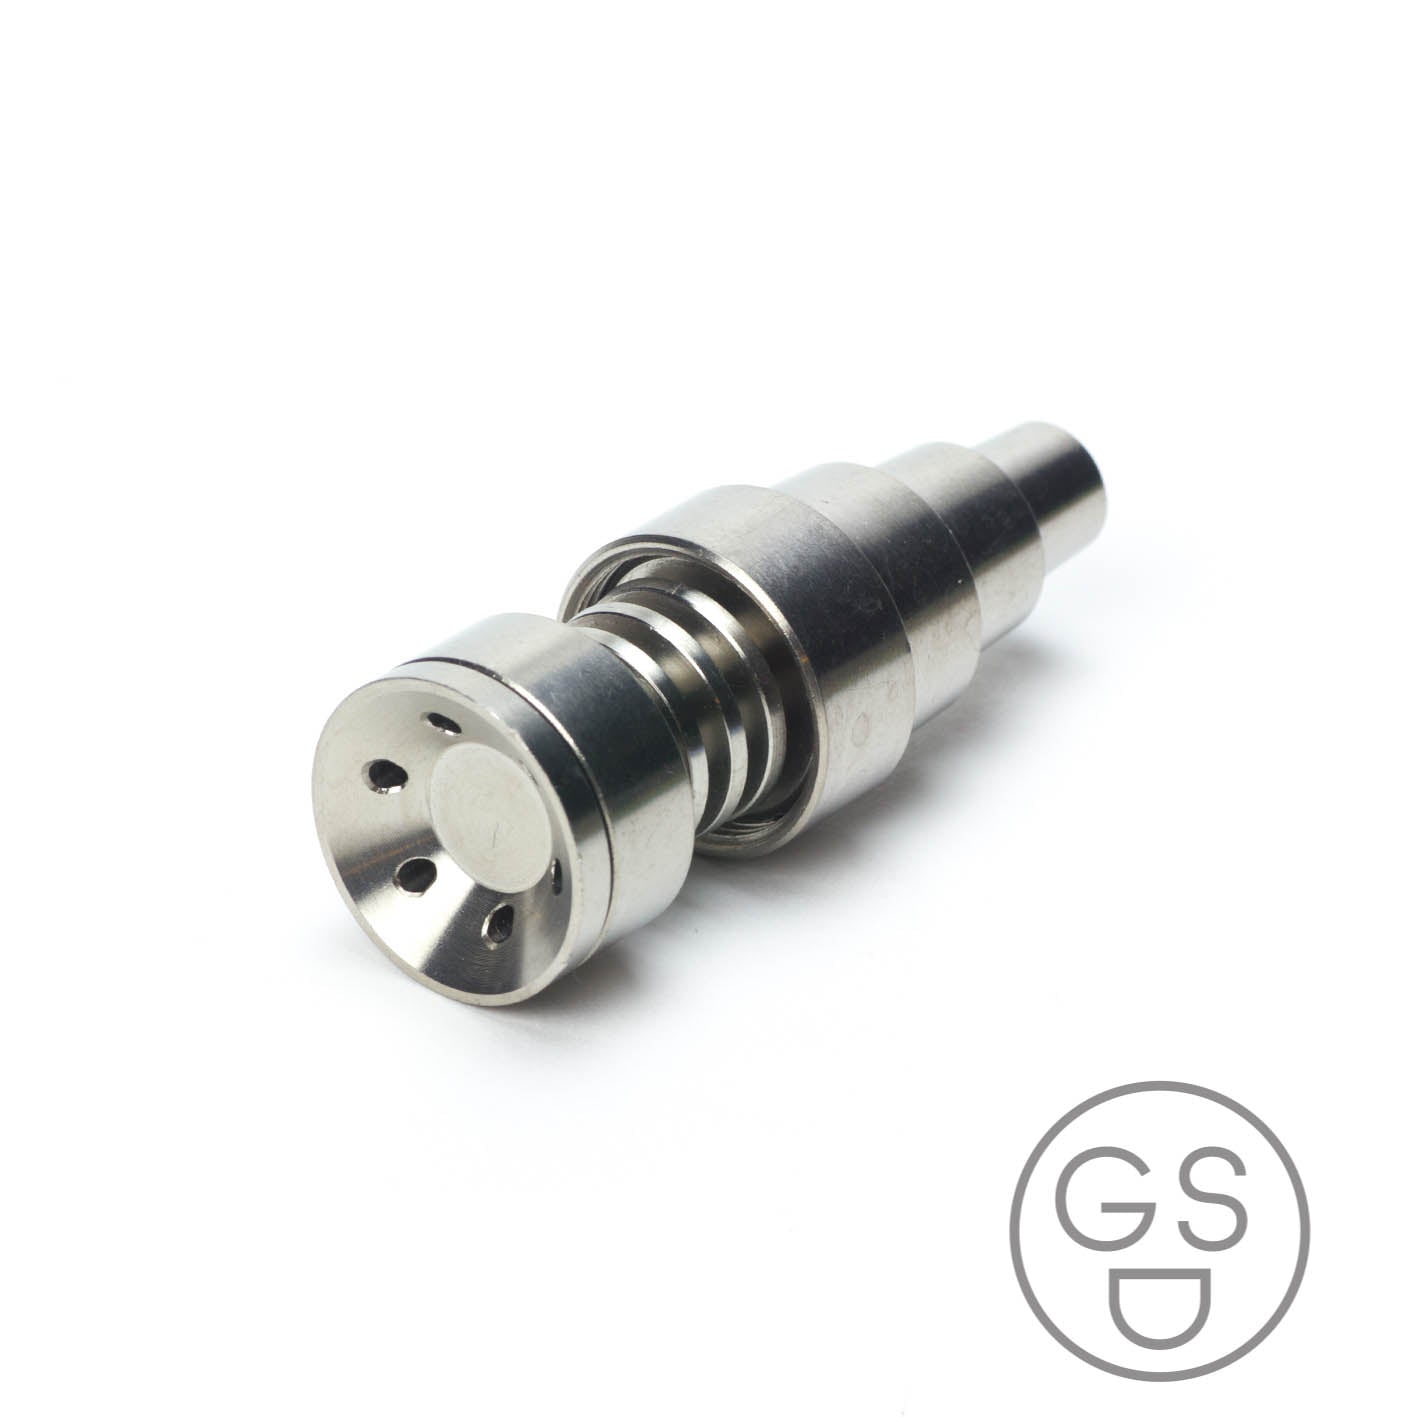 Titanium Universal Domeless Or Domed Nail